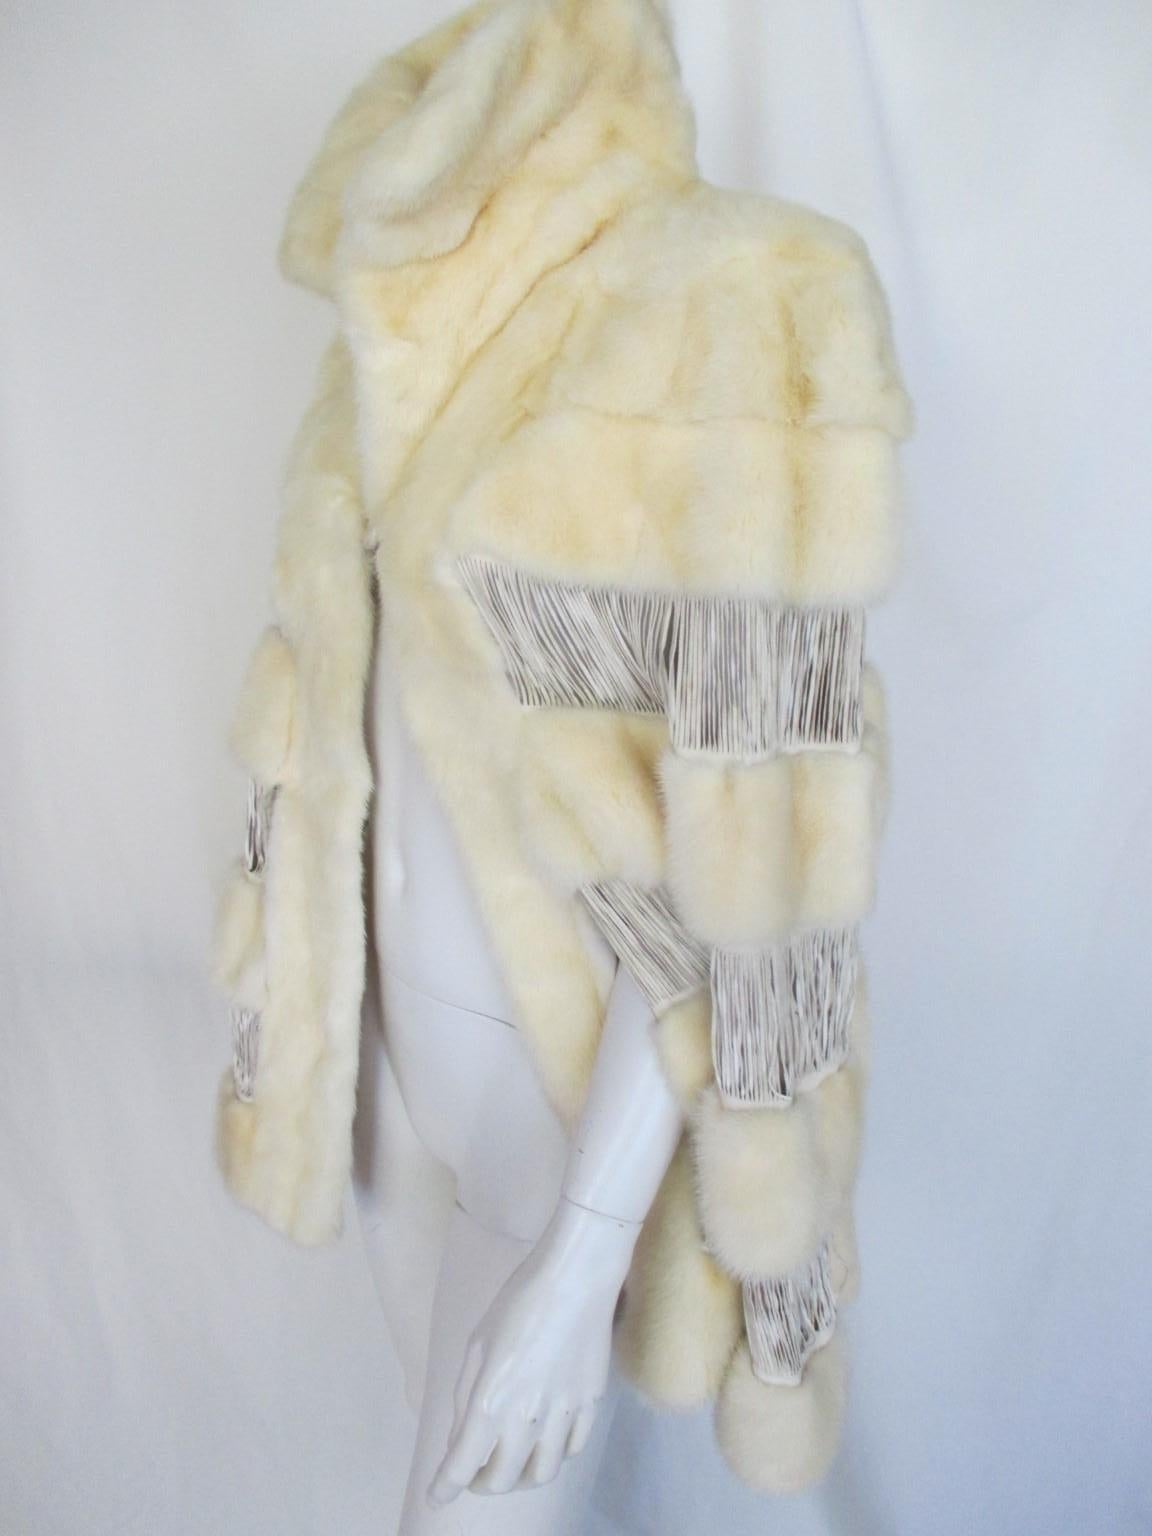 This rare vintage fur cape is made of soft mink with leather closed fringes

We offer more exclusive fur items, view our frontstore

Details:
1 closing button
2 open splits for hands
Light weight
Soft and supple
Furrier: Toschi, Italy
One